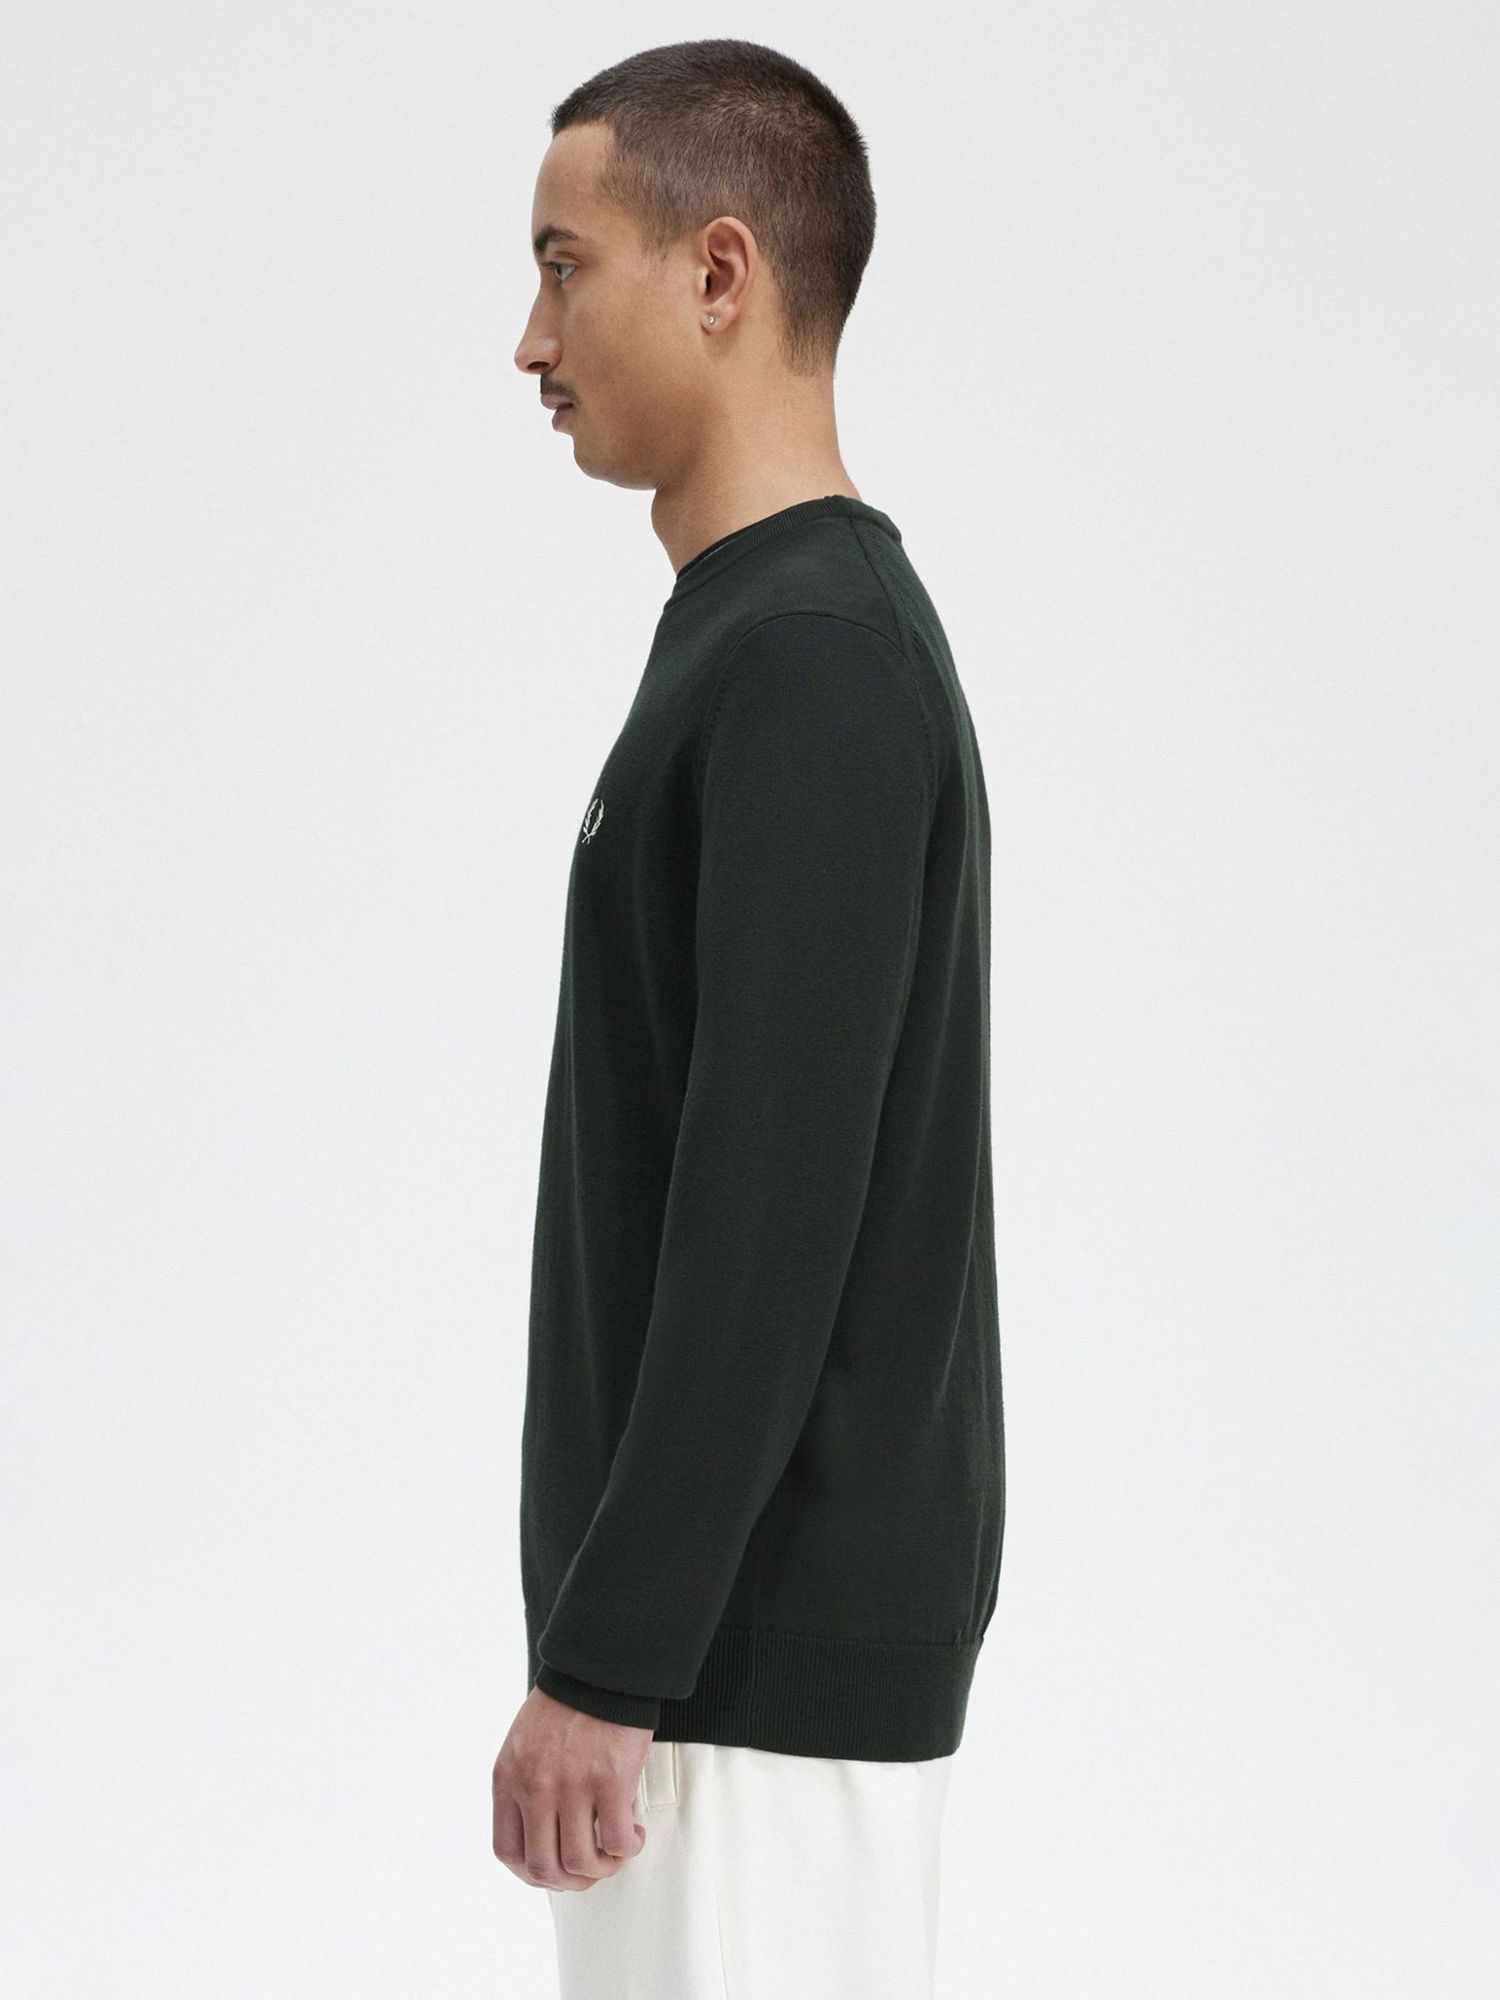 Fred Perry Crew Neck Jumper, Green at John Lewis & Partners